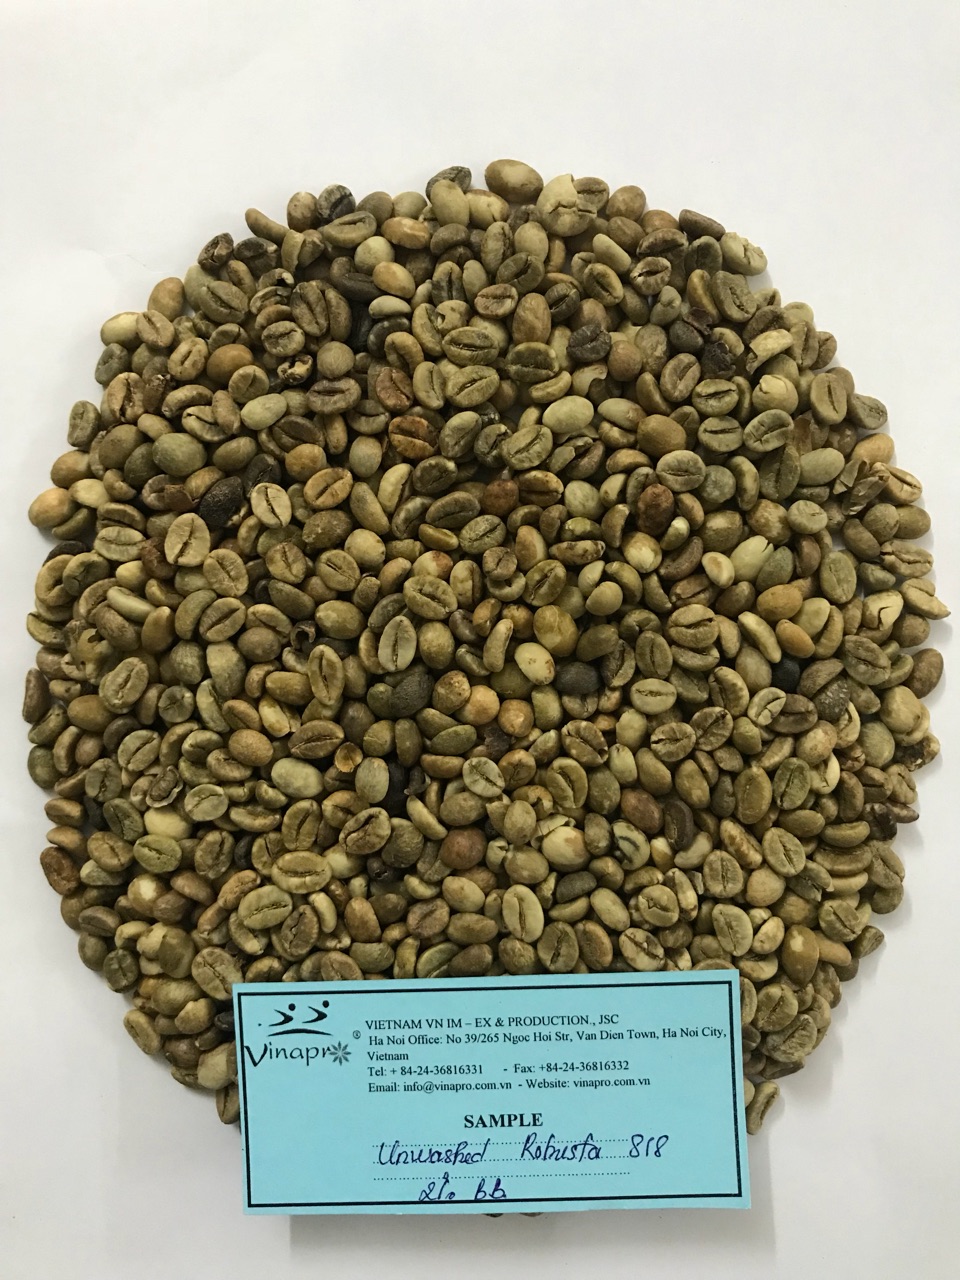 unwashed robusta coffee bean s16-s18